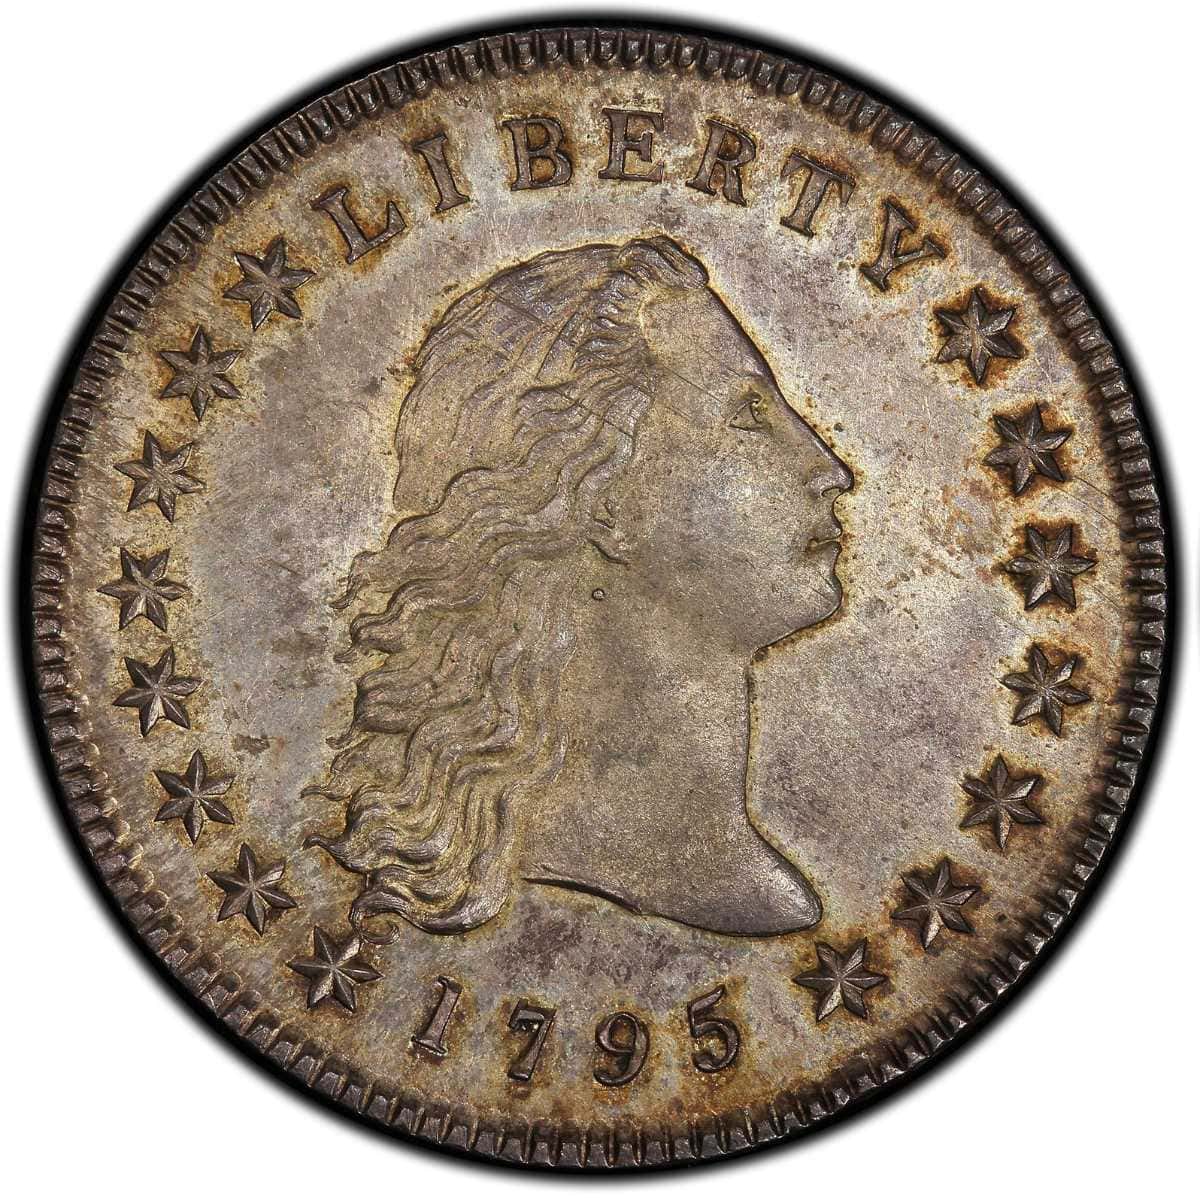 1795 Flowing Hair Silver Dollar Obverse Design and Features